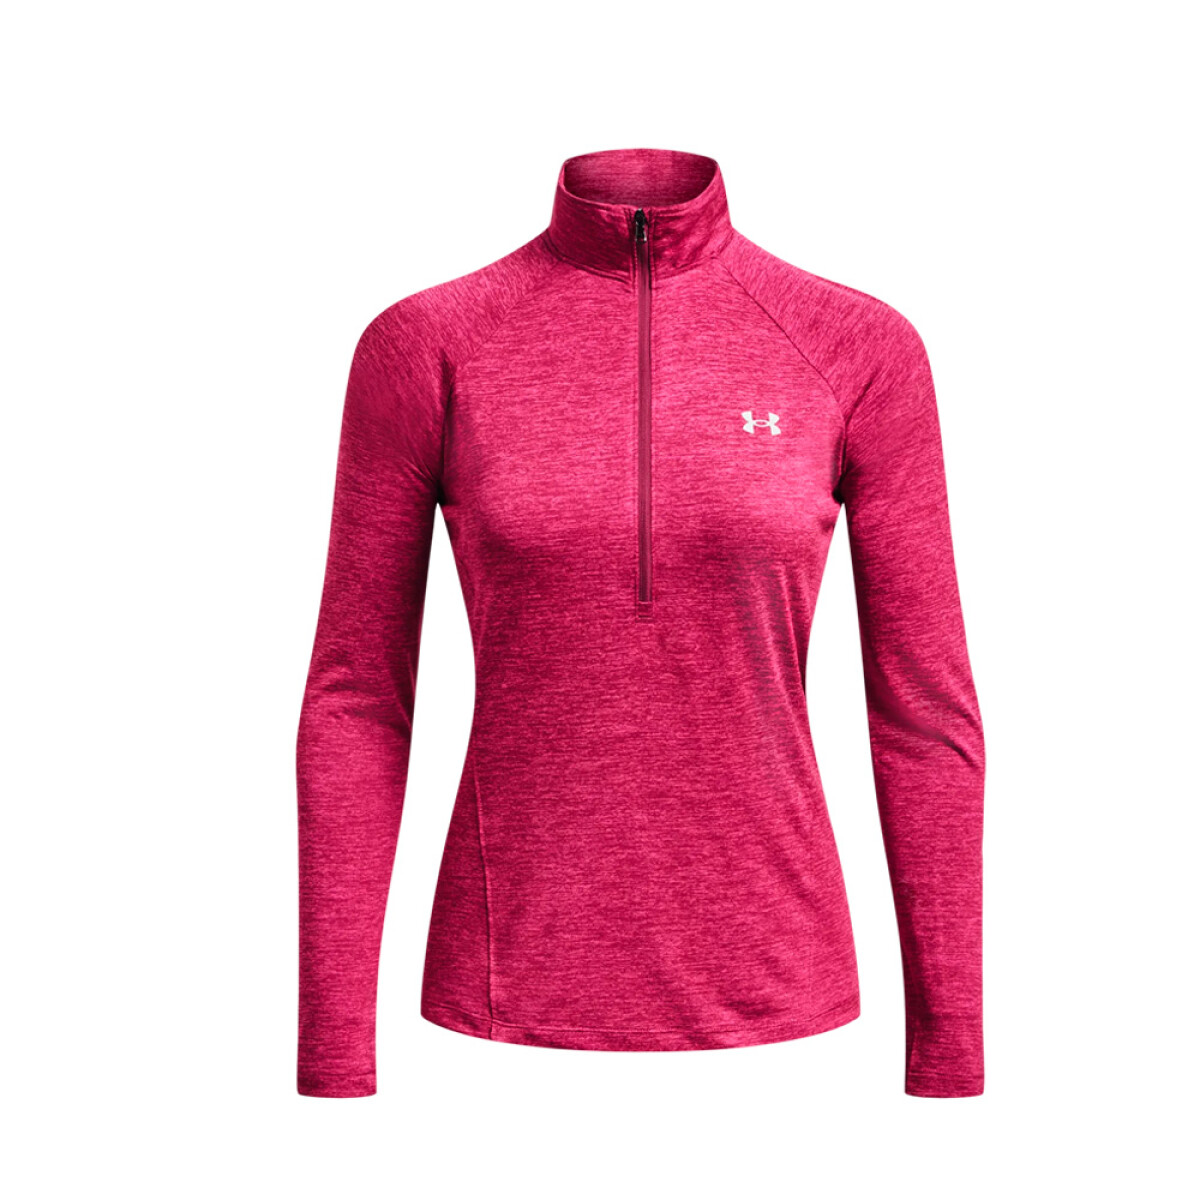 REMERA UNDER ARMOUR TECH 1/2 ZIP - Red 